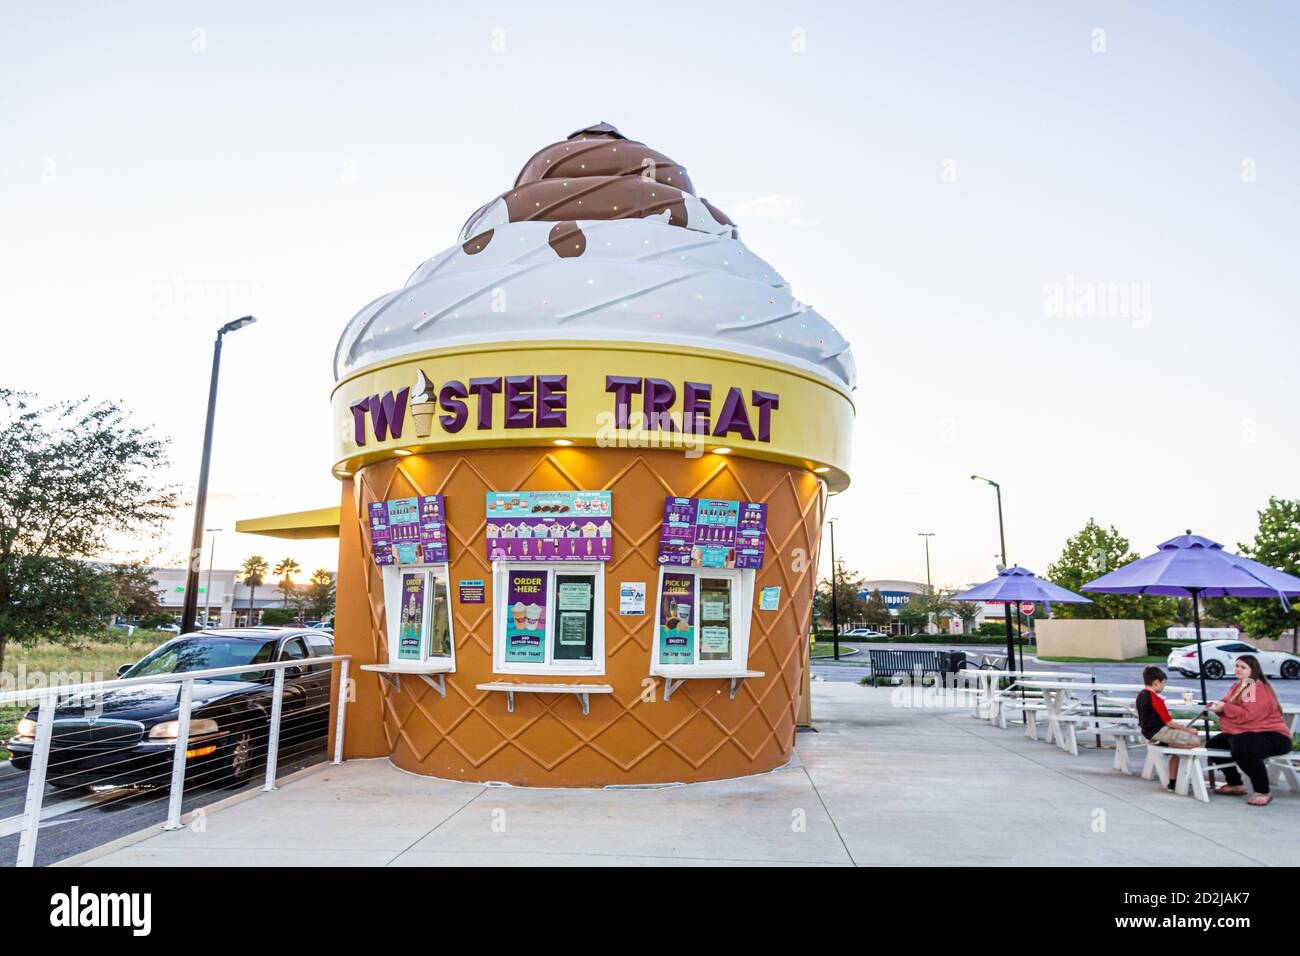 Spring Hill Florida,Twistee Treat,ice cream restaurant restaurants food dining eating out cafe cafes bistro,soft serve ice cream cone shaped building, Stock Photo